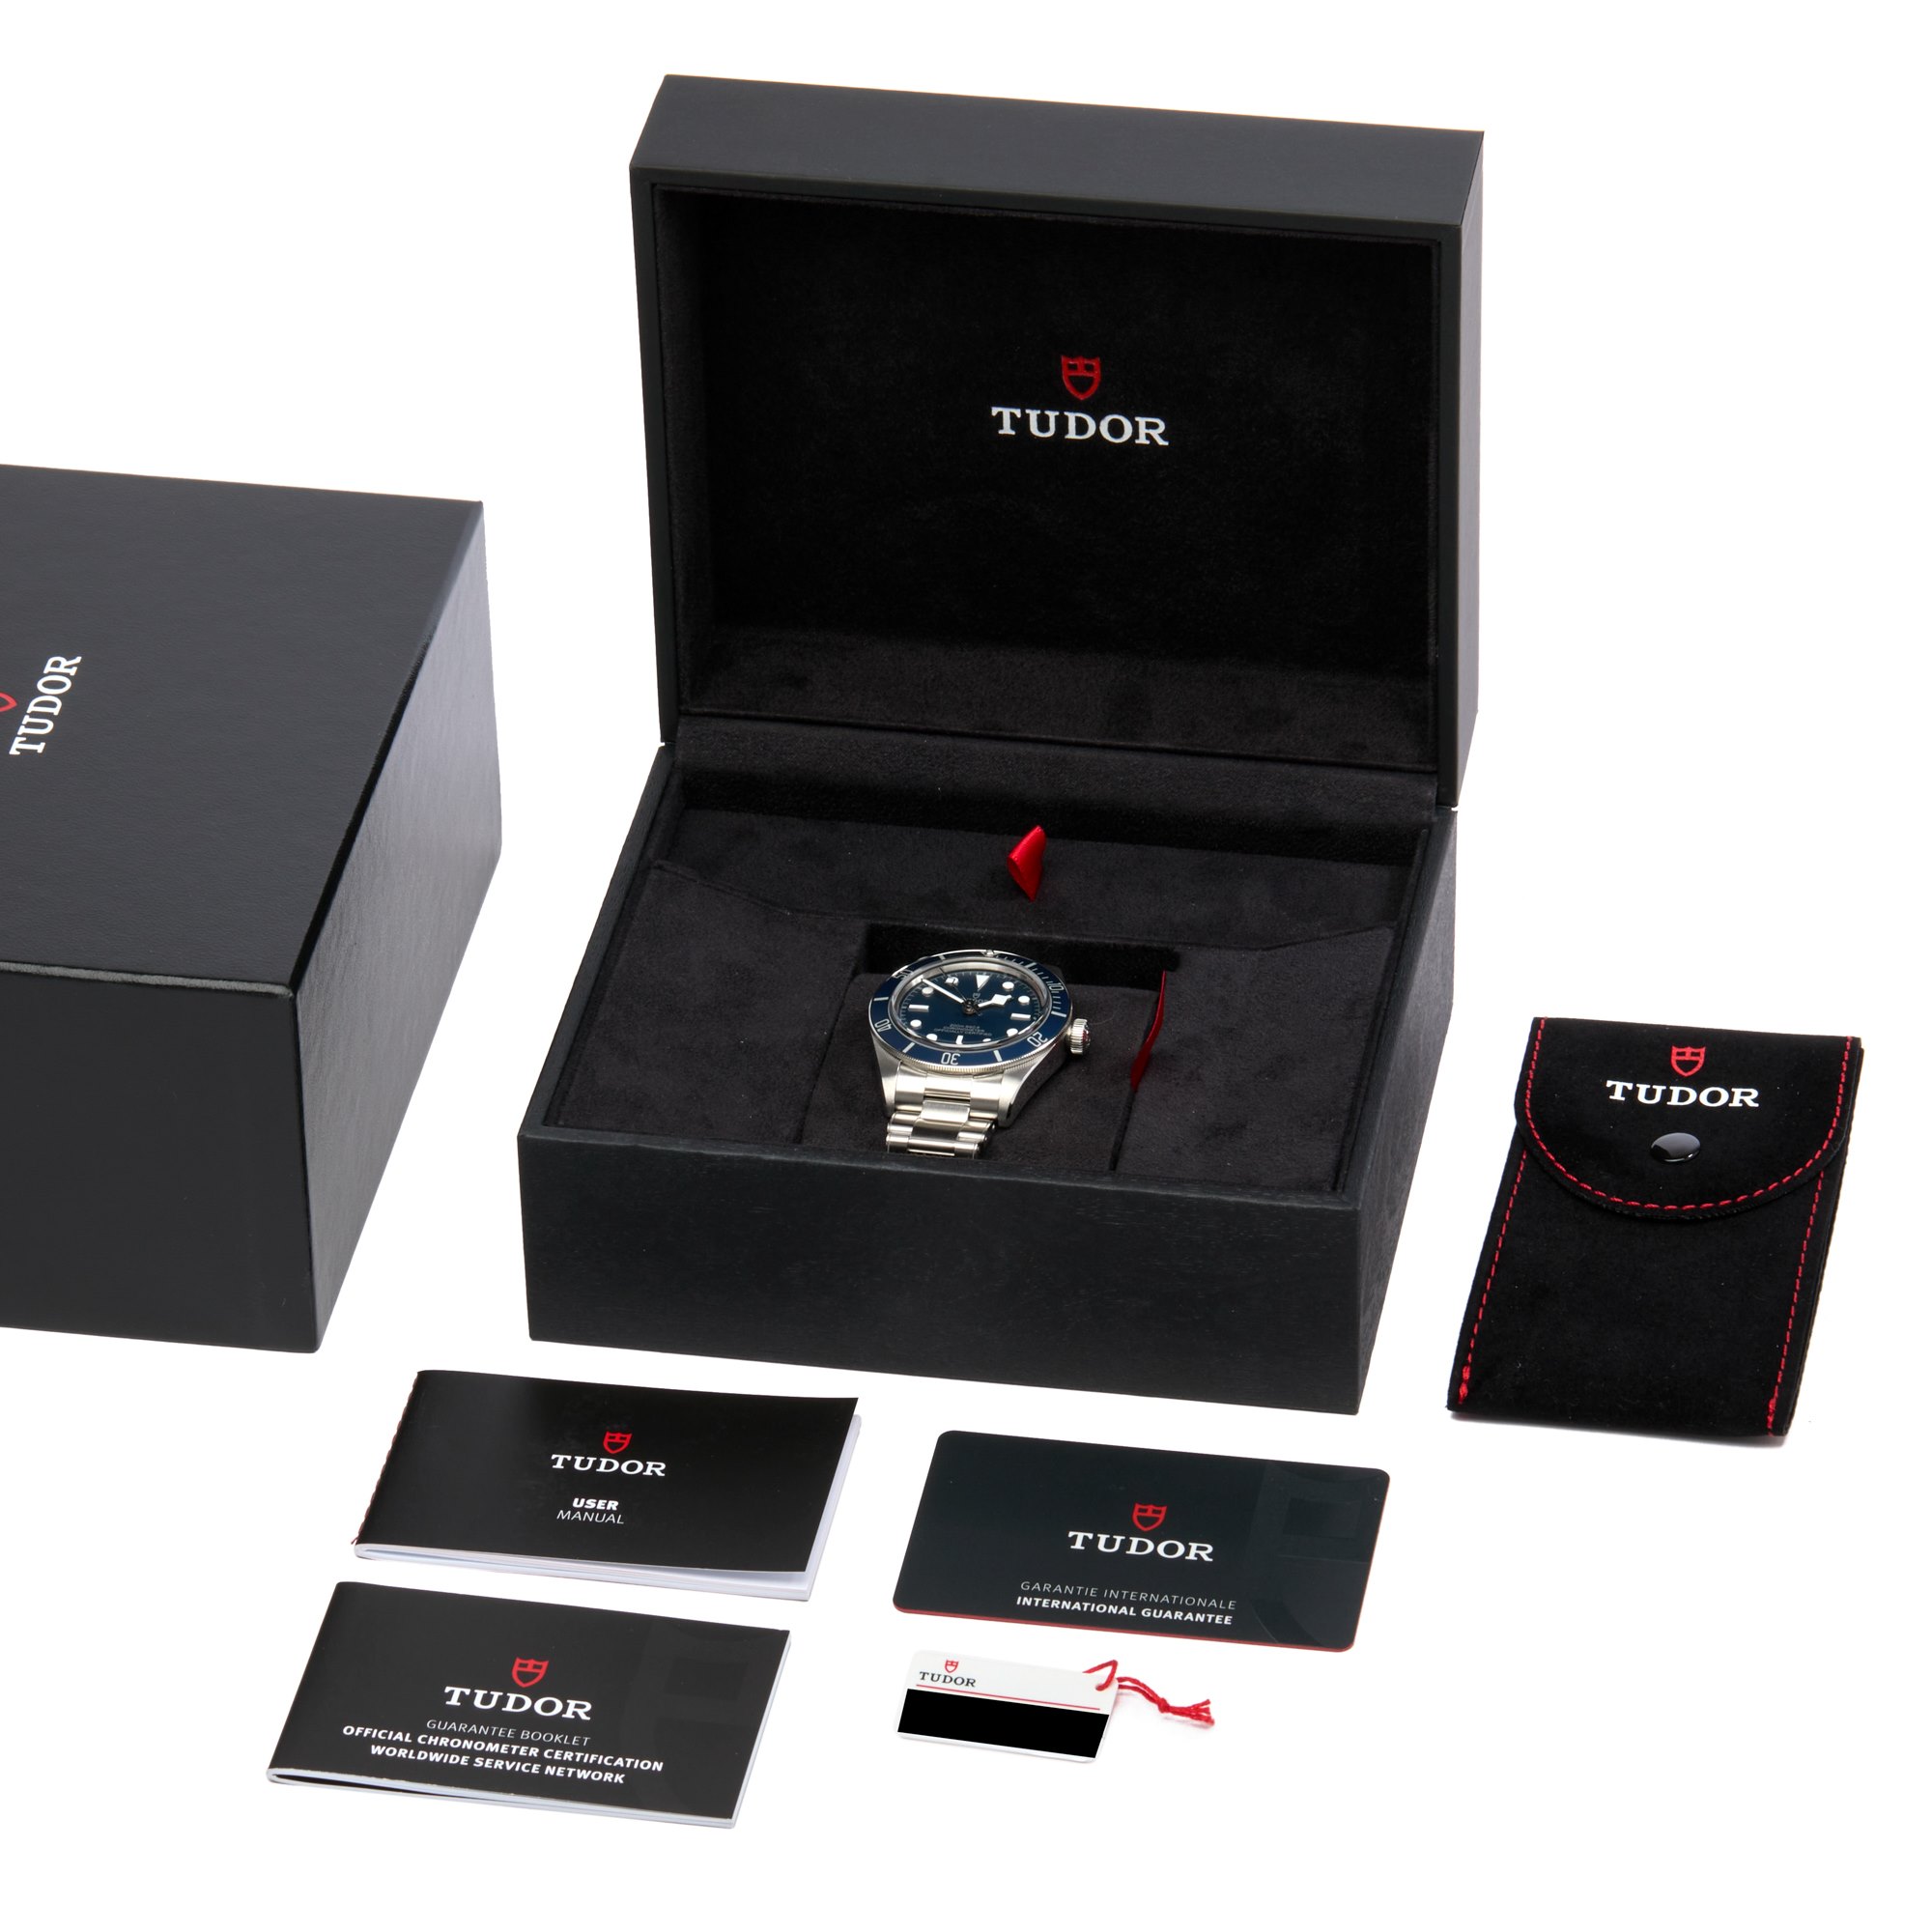 Tudor Black Bay Fifty Eight Stainless Steel 79030B